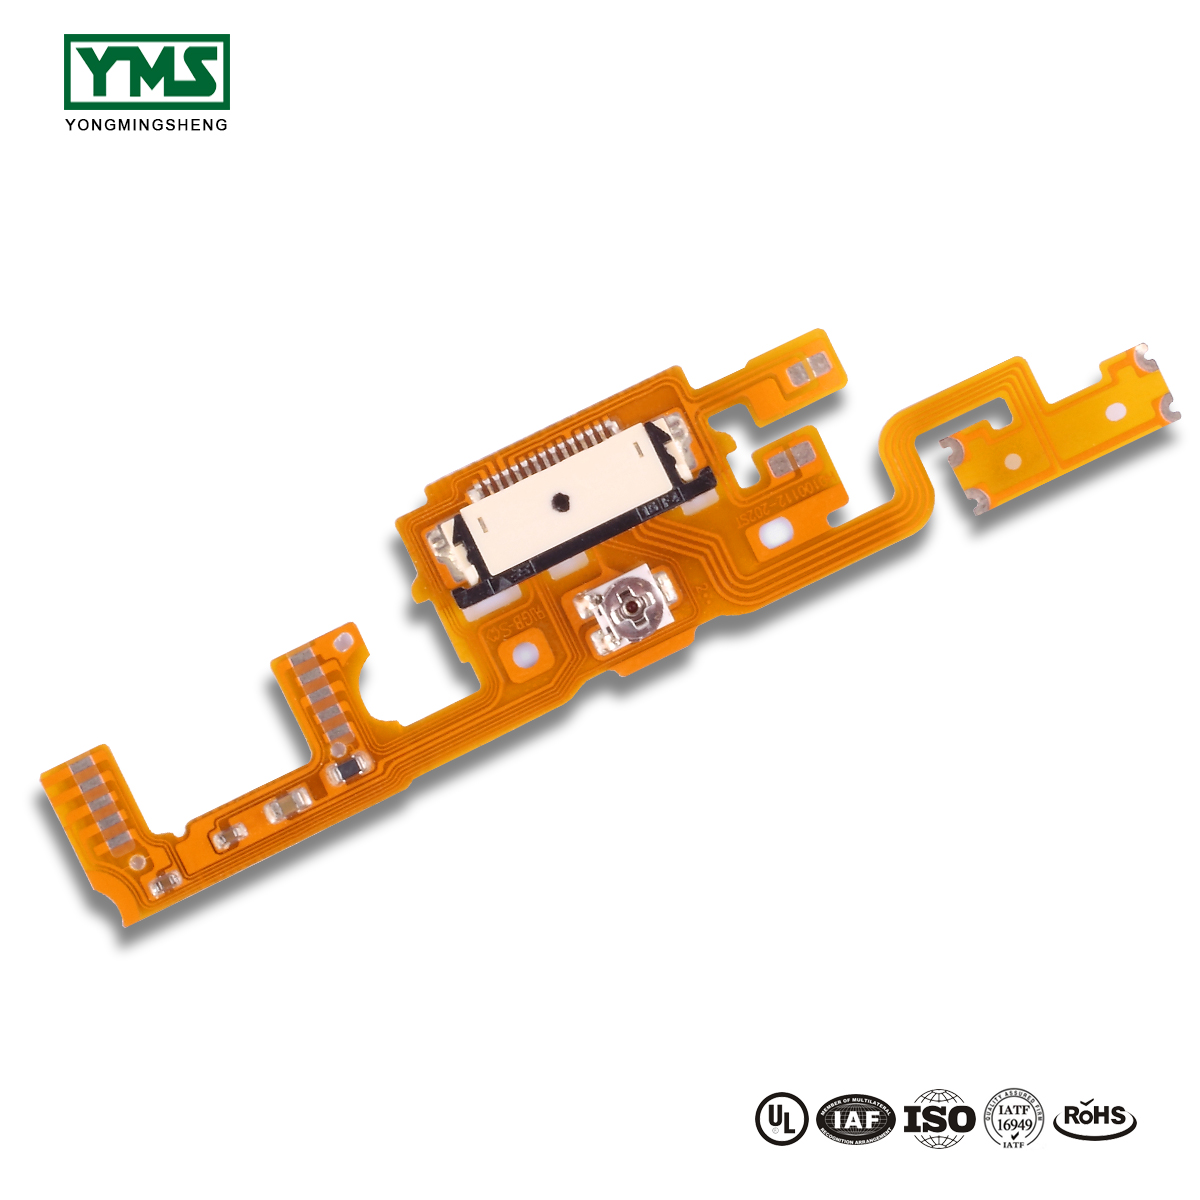 Super Lowest Price Double Layer Fpc - 1Layer Flexible Board | YMSPCB – Yongmingsheng